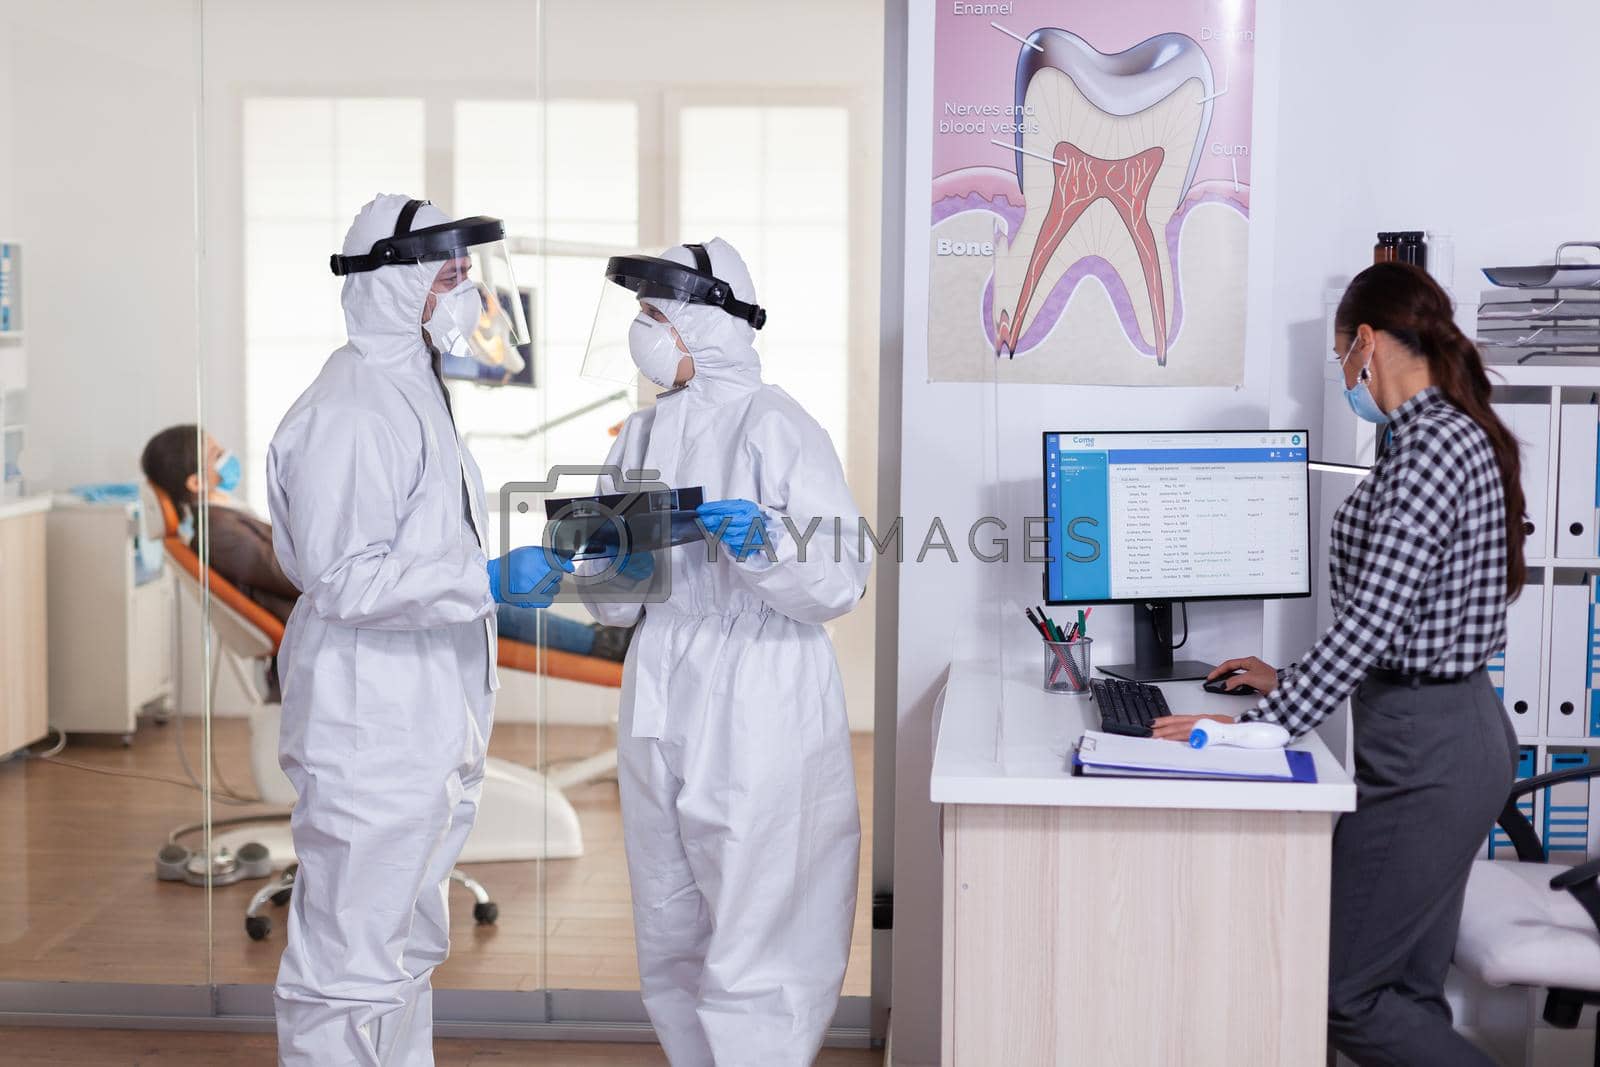 Dentist assistant discussing with doctor patient diagnosis keeping social distancing dressed in ppe suit face shiled, during global pandemic with coronavirus holding x-ray.